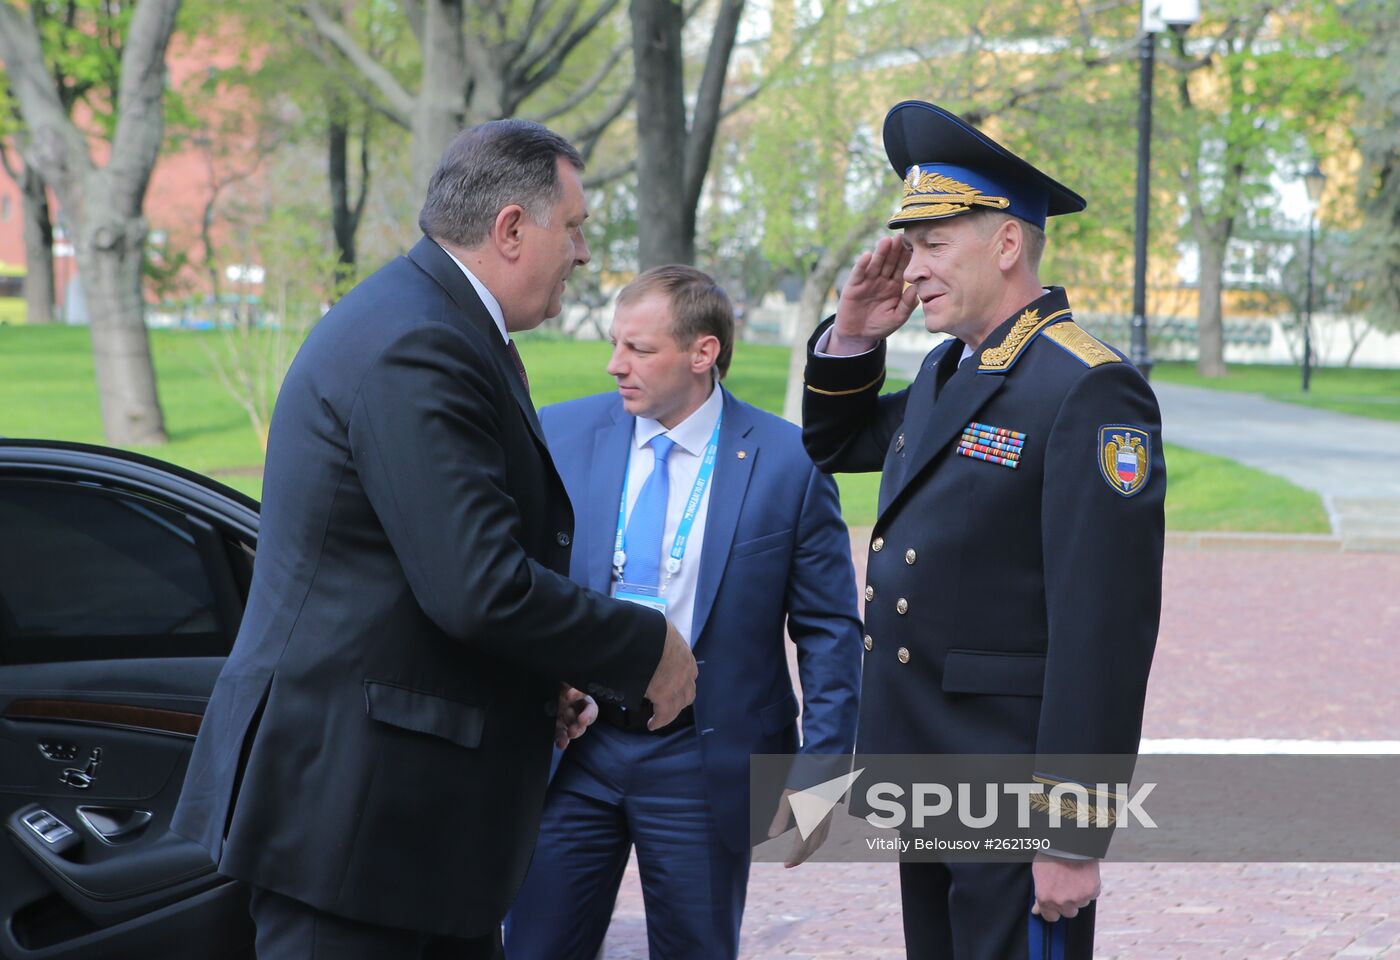 Foreign delegation heads and honorary guests welcomed by Kremlin's Commandant Sergei Khlebnikov